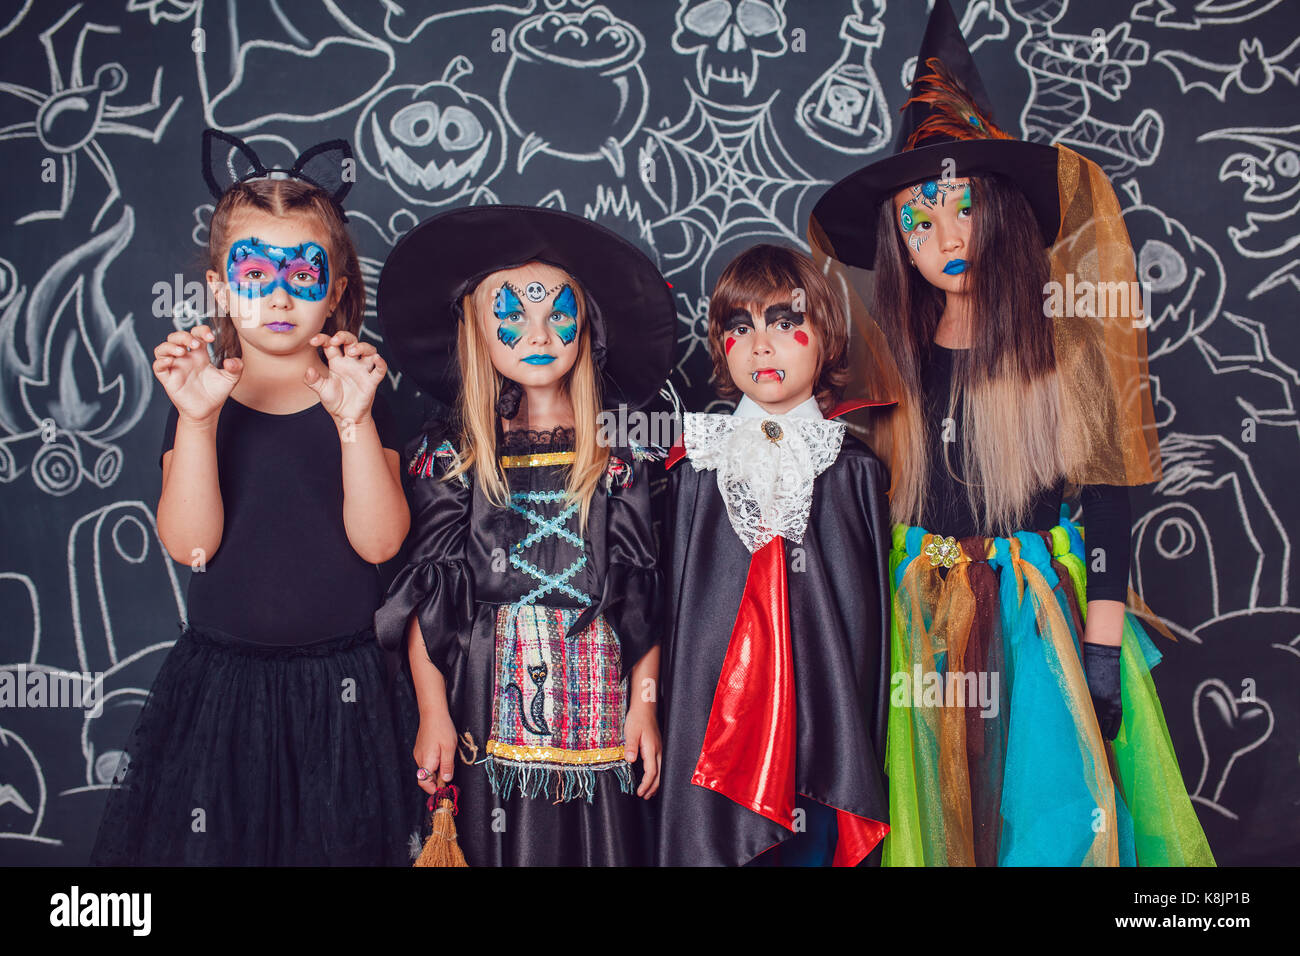 Children in scary Halloween costumes stand against a wall with drawings. Stock Photo